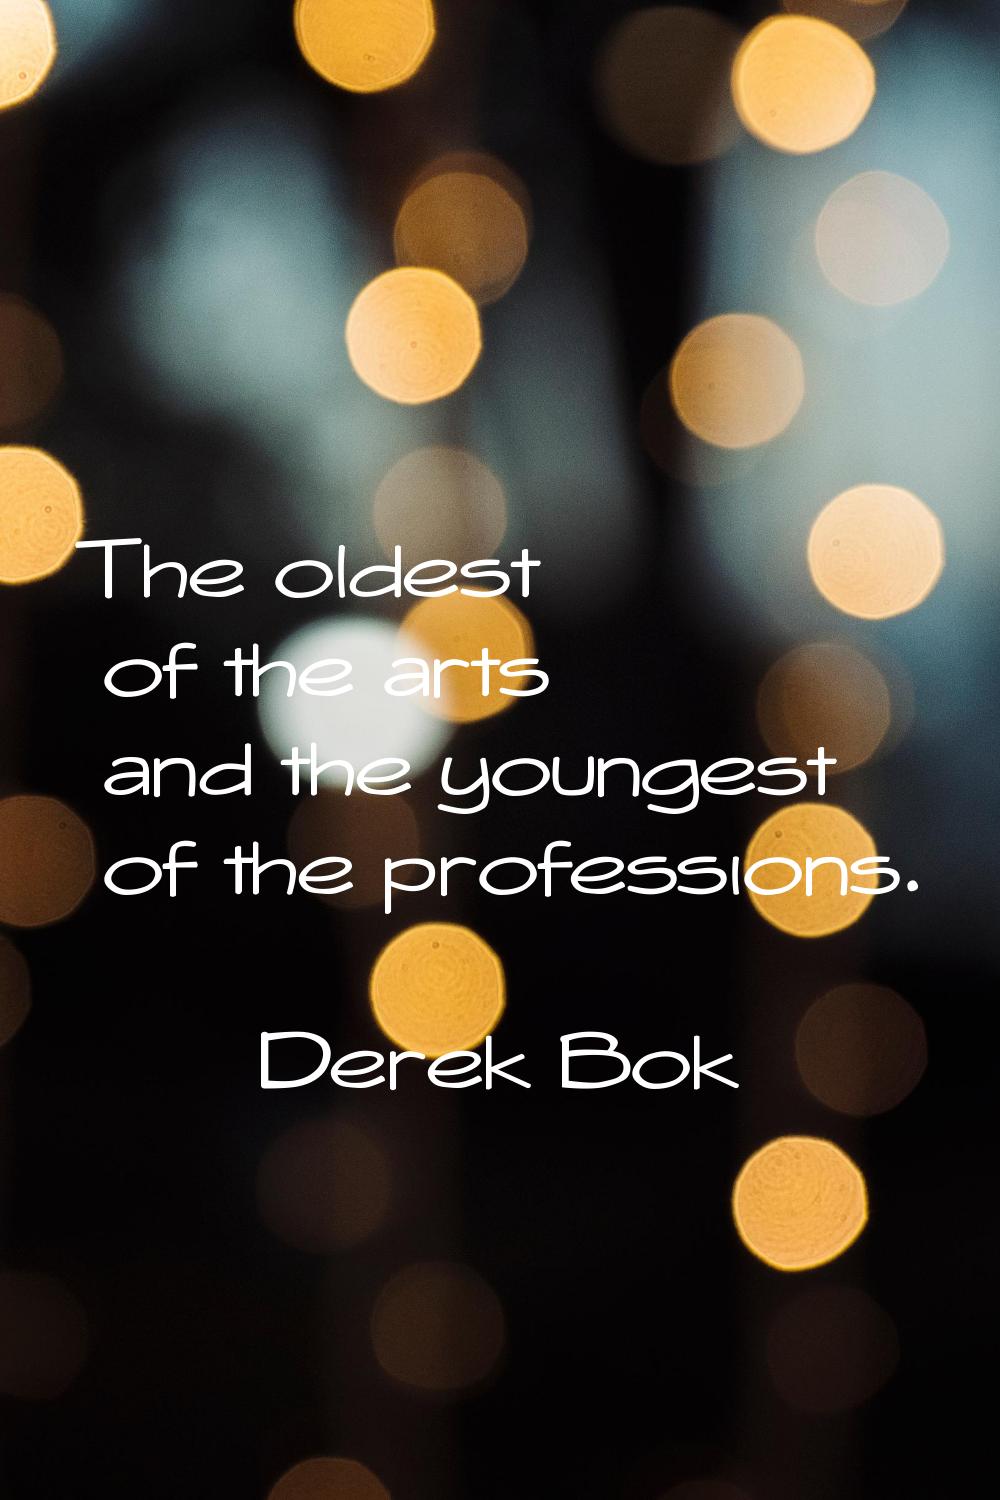 The oldest of the arts and the youngest of the professions.